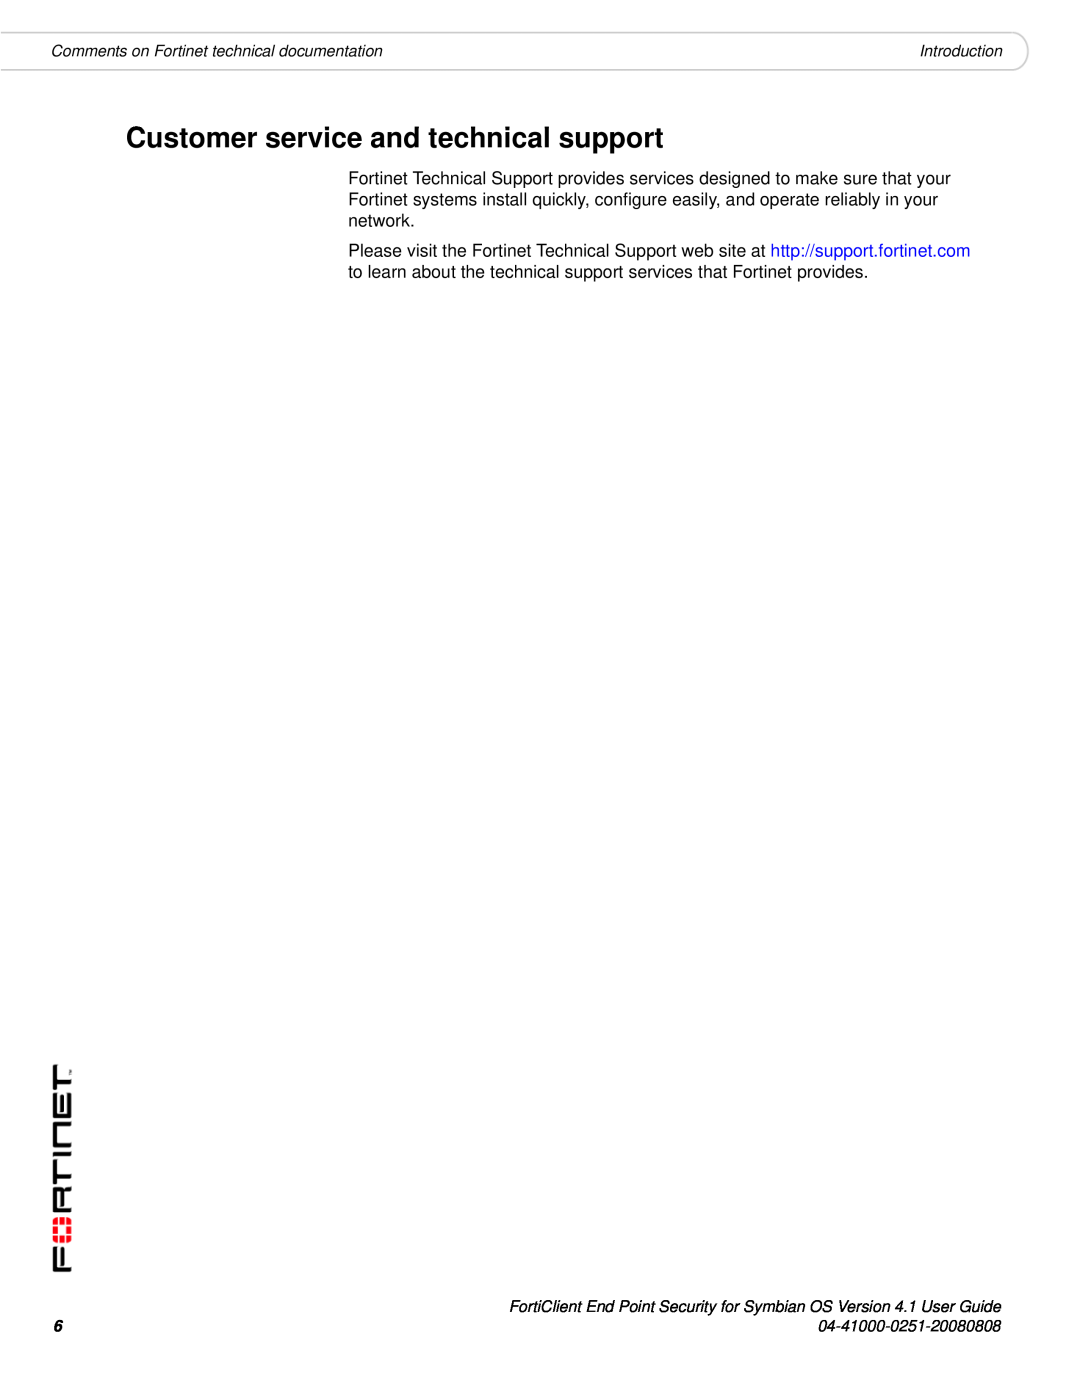 Fortinet Version 4.1 manual Customer service and technical support, Introduction 